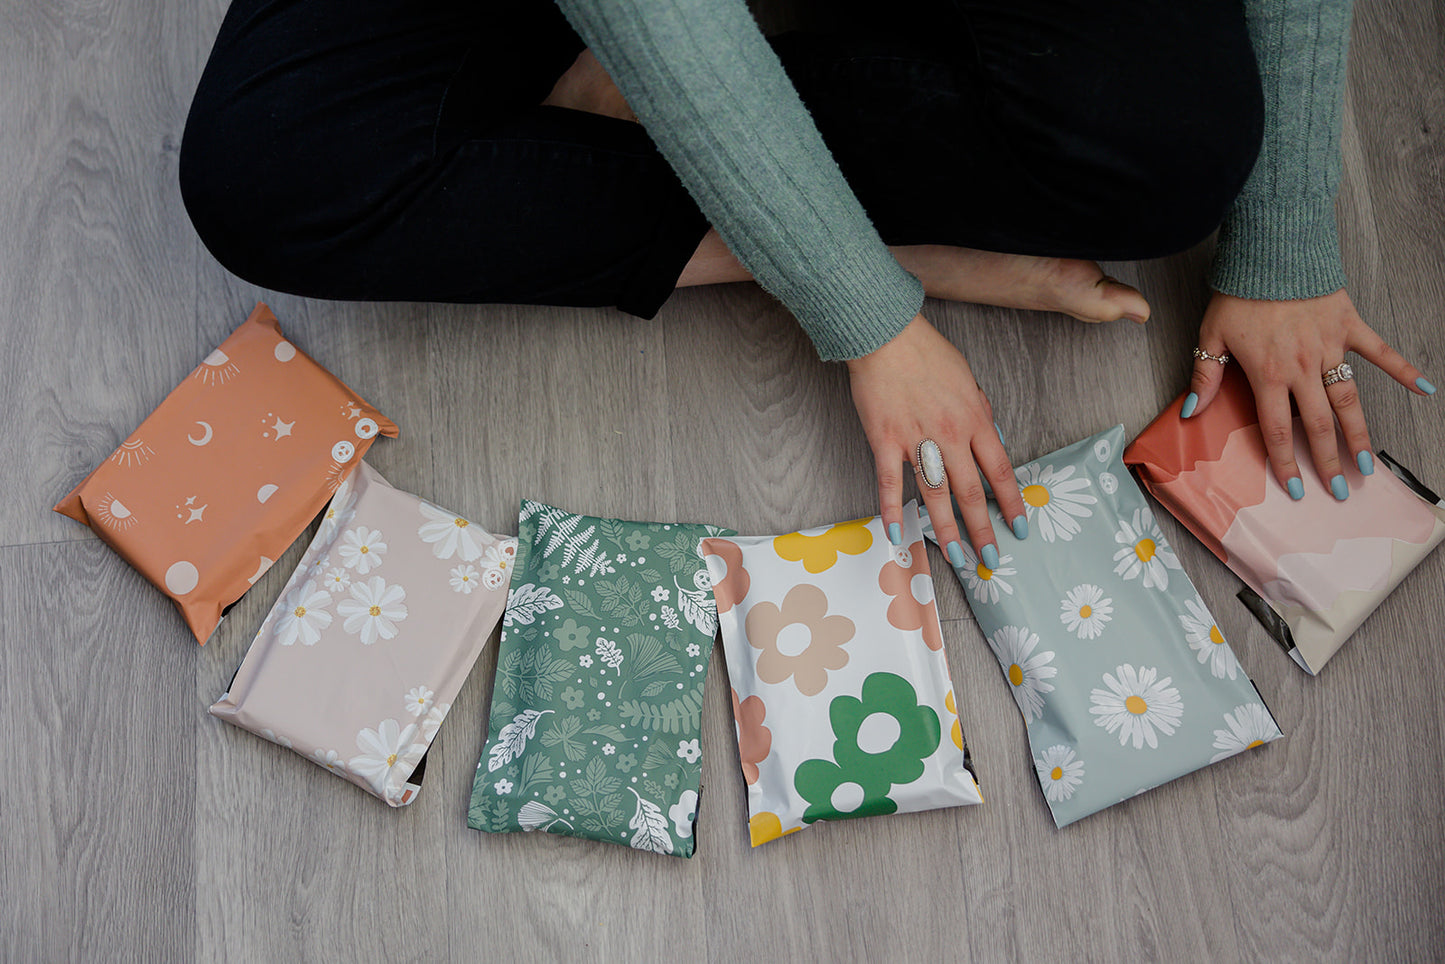 A woman is sitting on a wooden floor with a bunch of impack.co Biodegradable Mailers 10" x 13" of different colors.